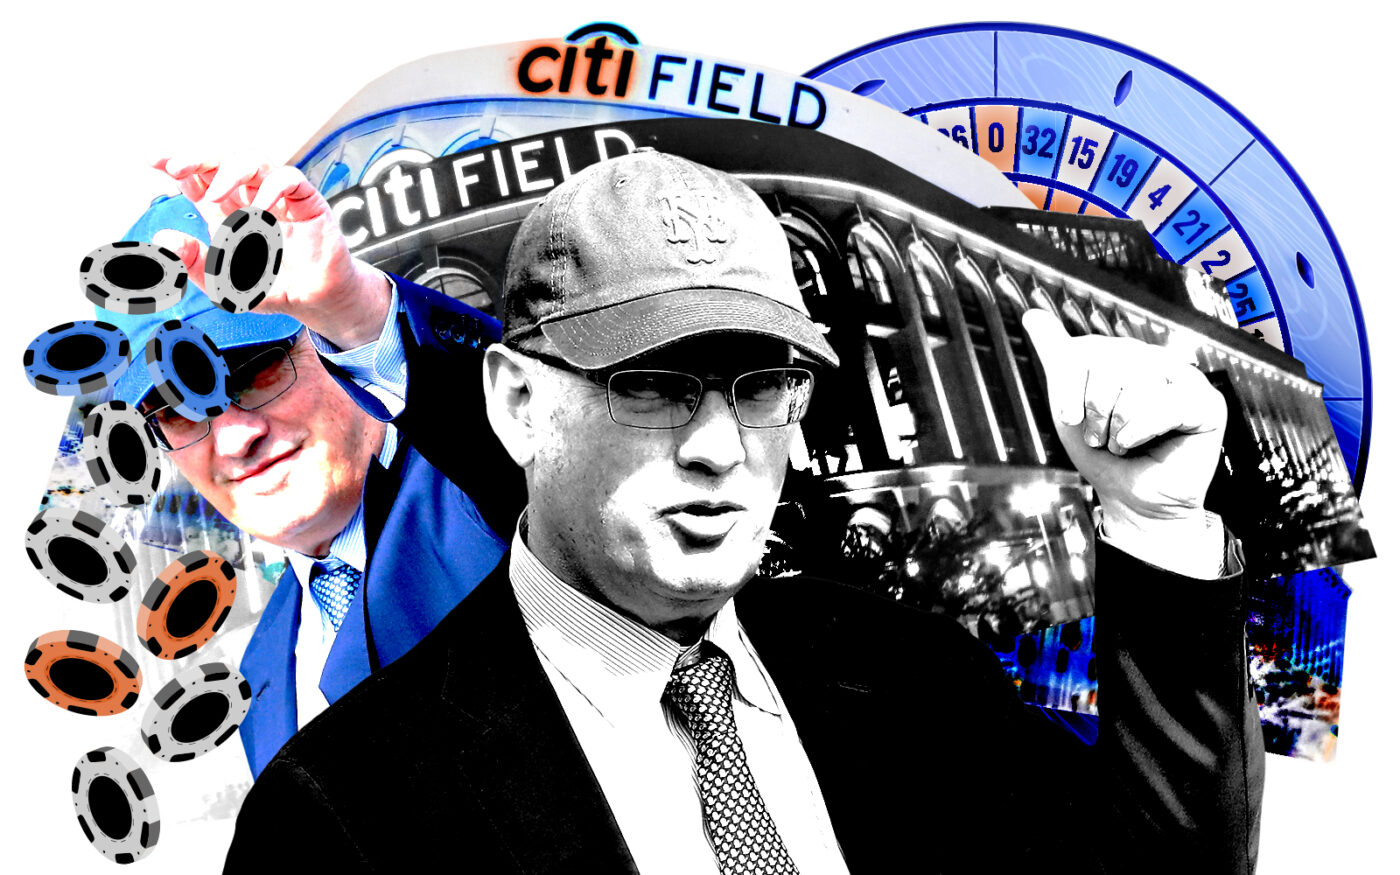 Owner of the New York Mets Steven Cohen and Citi Field (Photo Illustration by Steven Dilakian for The Real Deal with Getty)